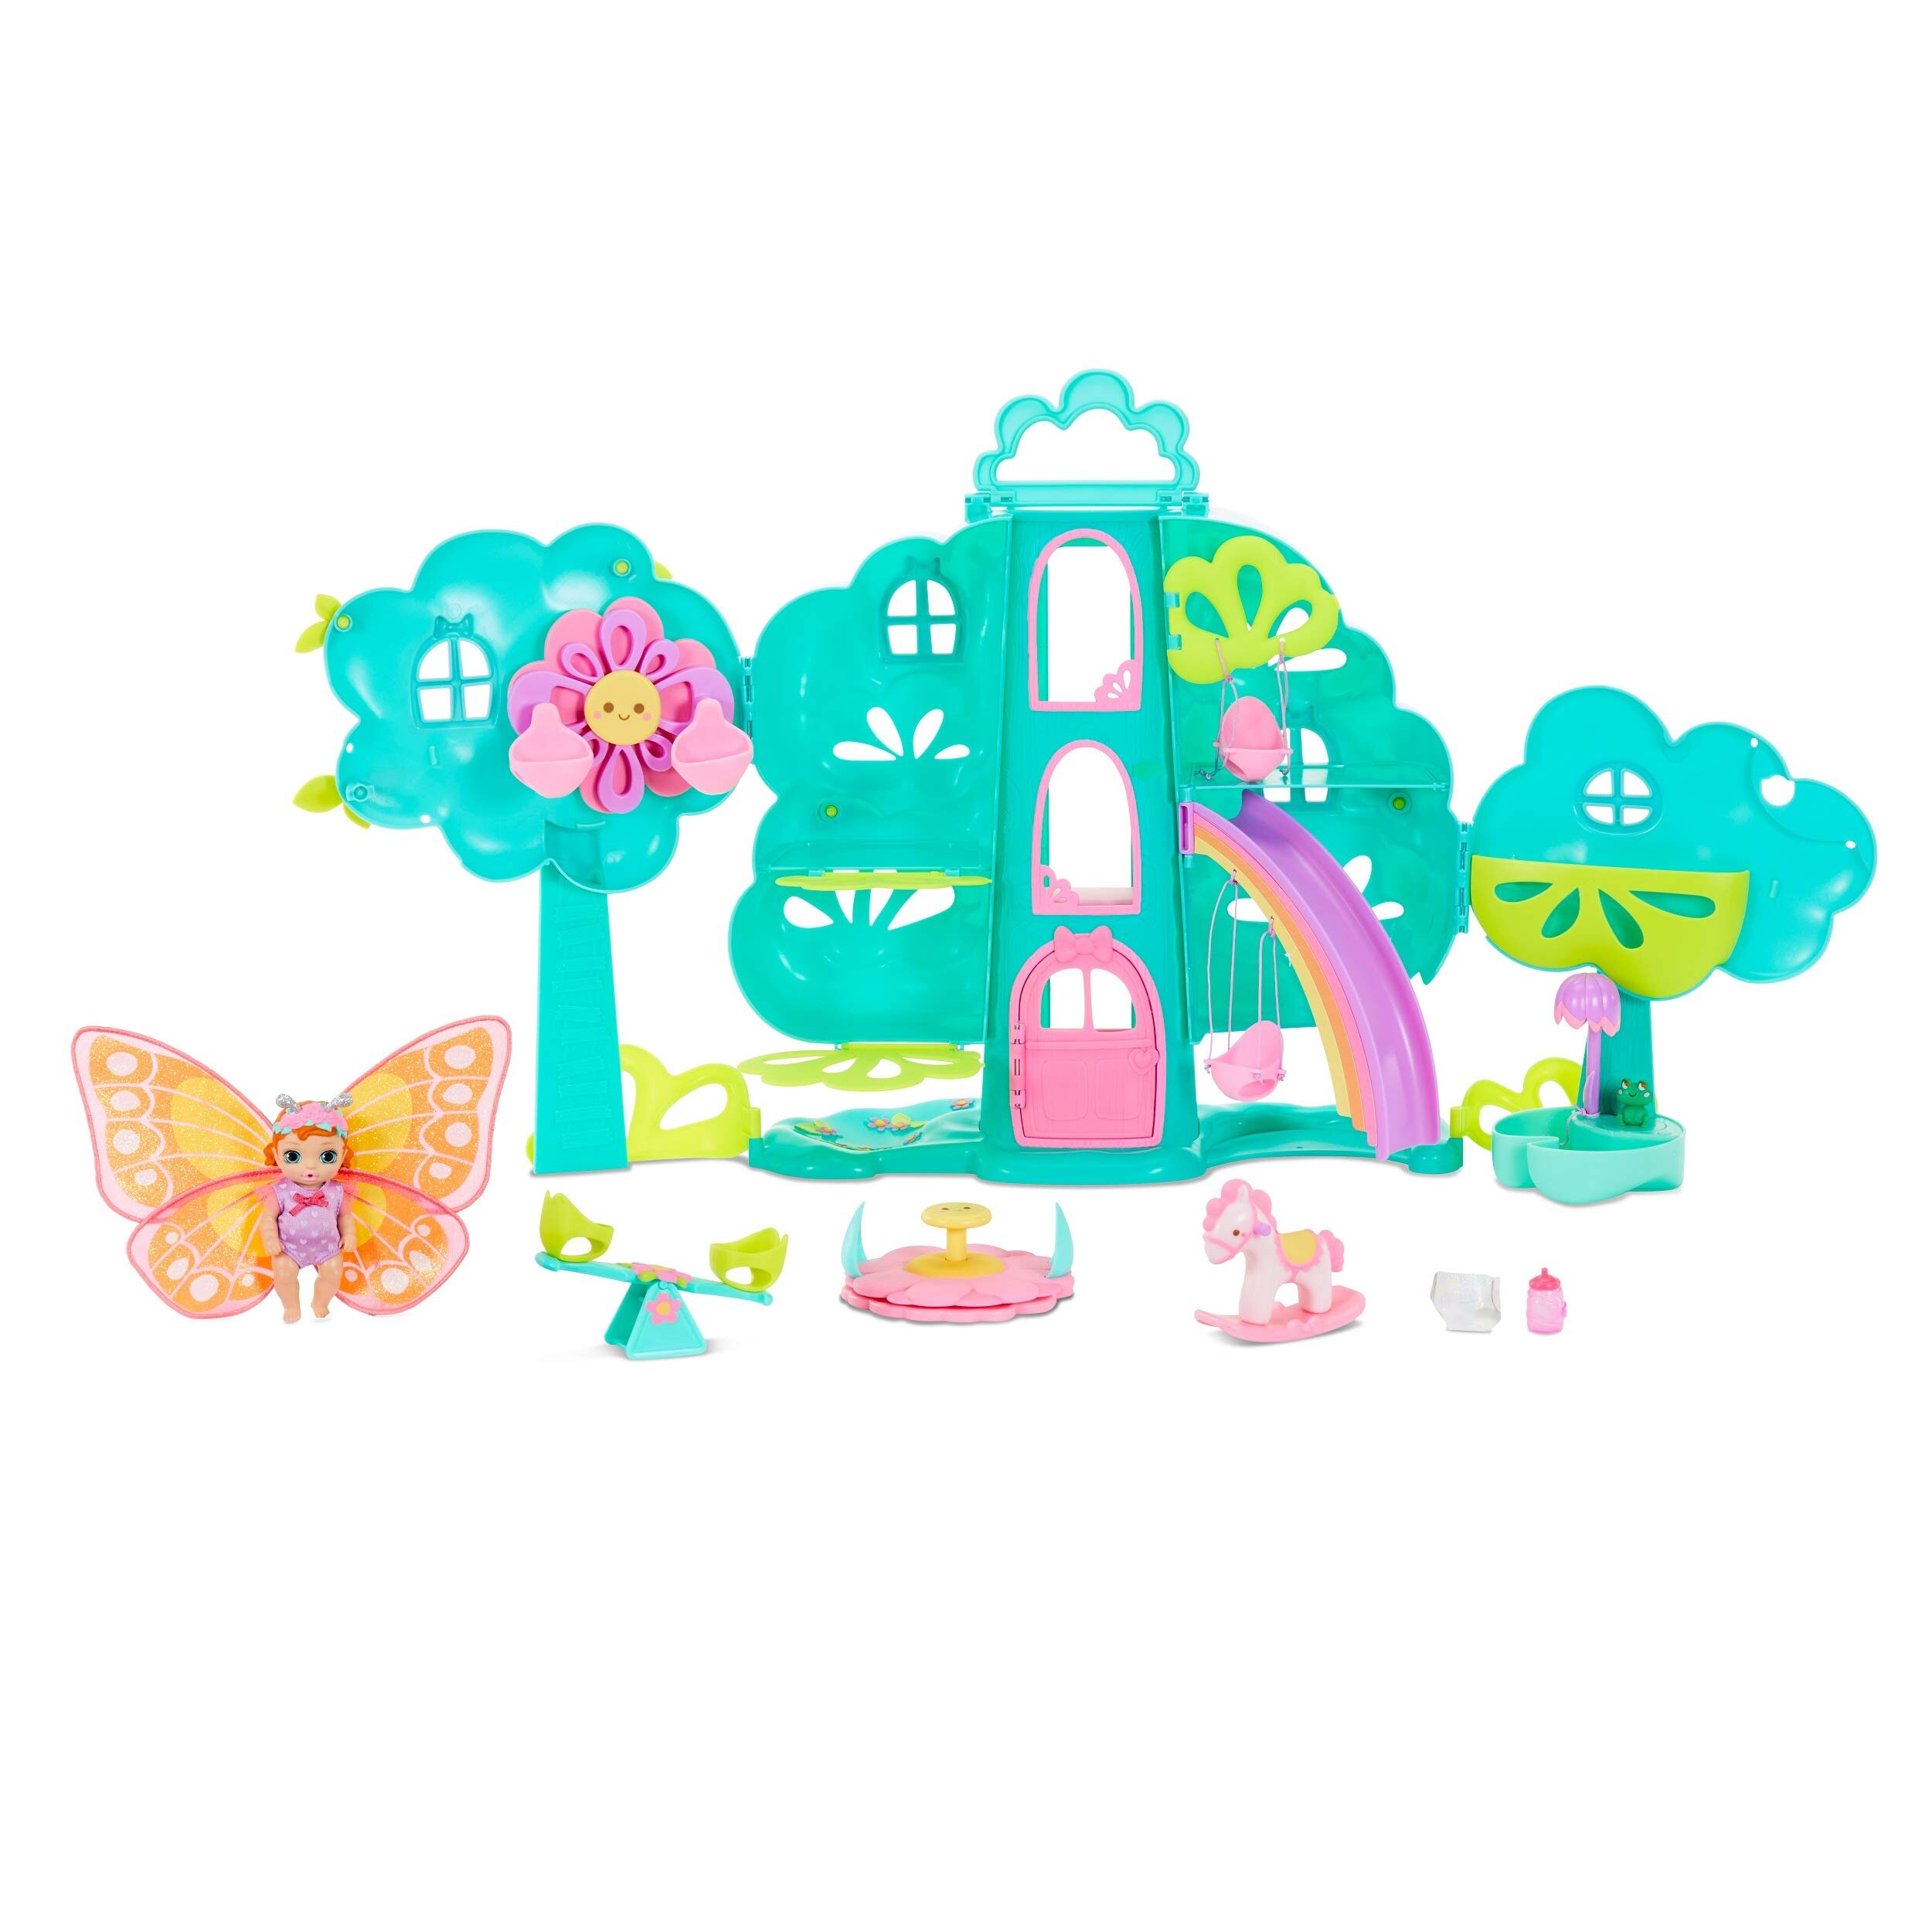 Baby Born Surprise Treehouse Playset With 20 Plus Surprises And Exclusive Doll, Multicolored